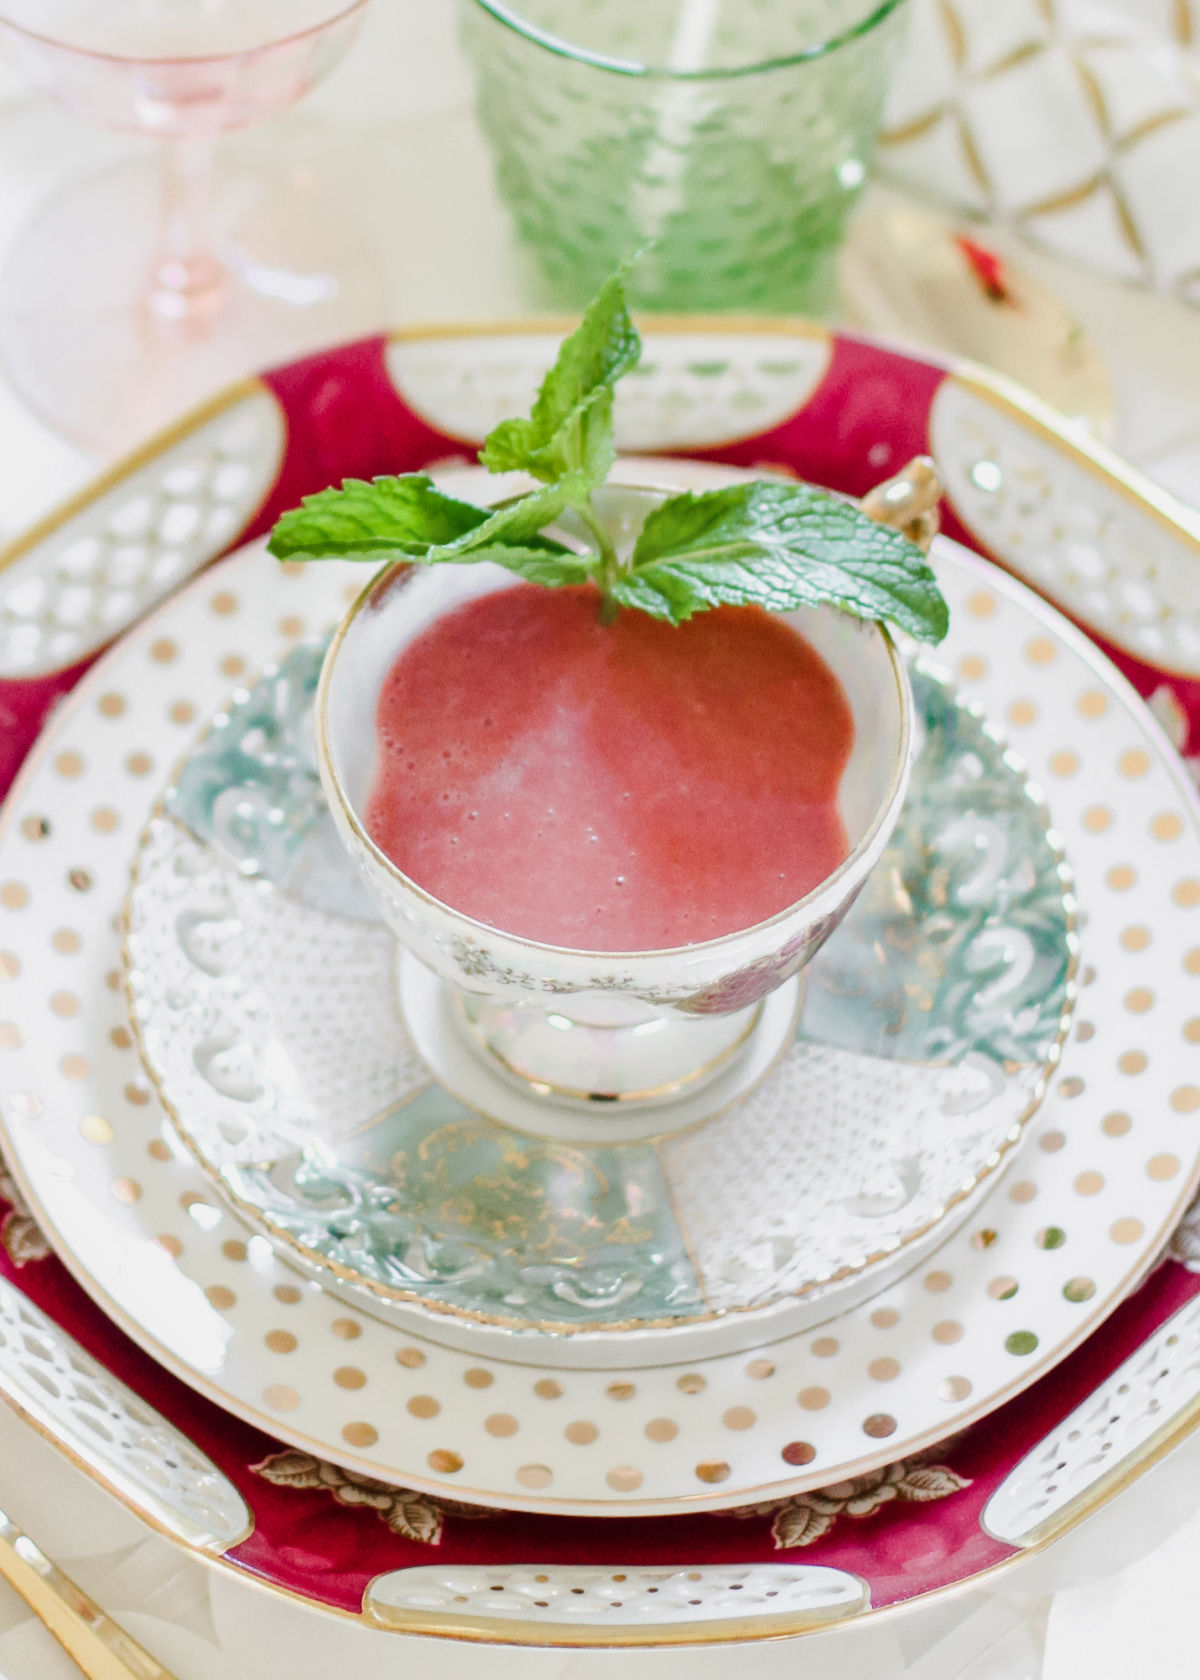 chilled pink soup in tea cup on plates.